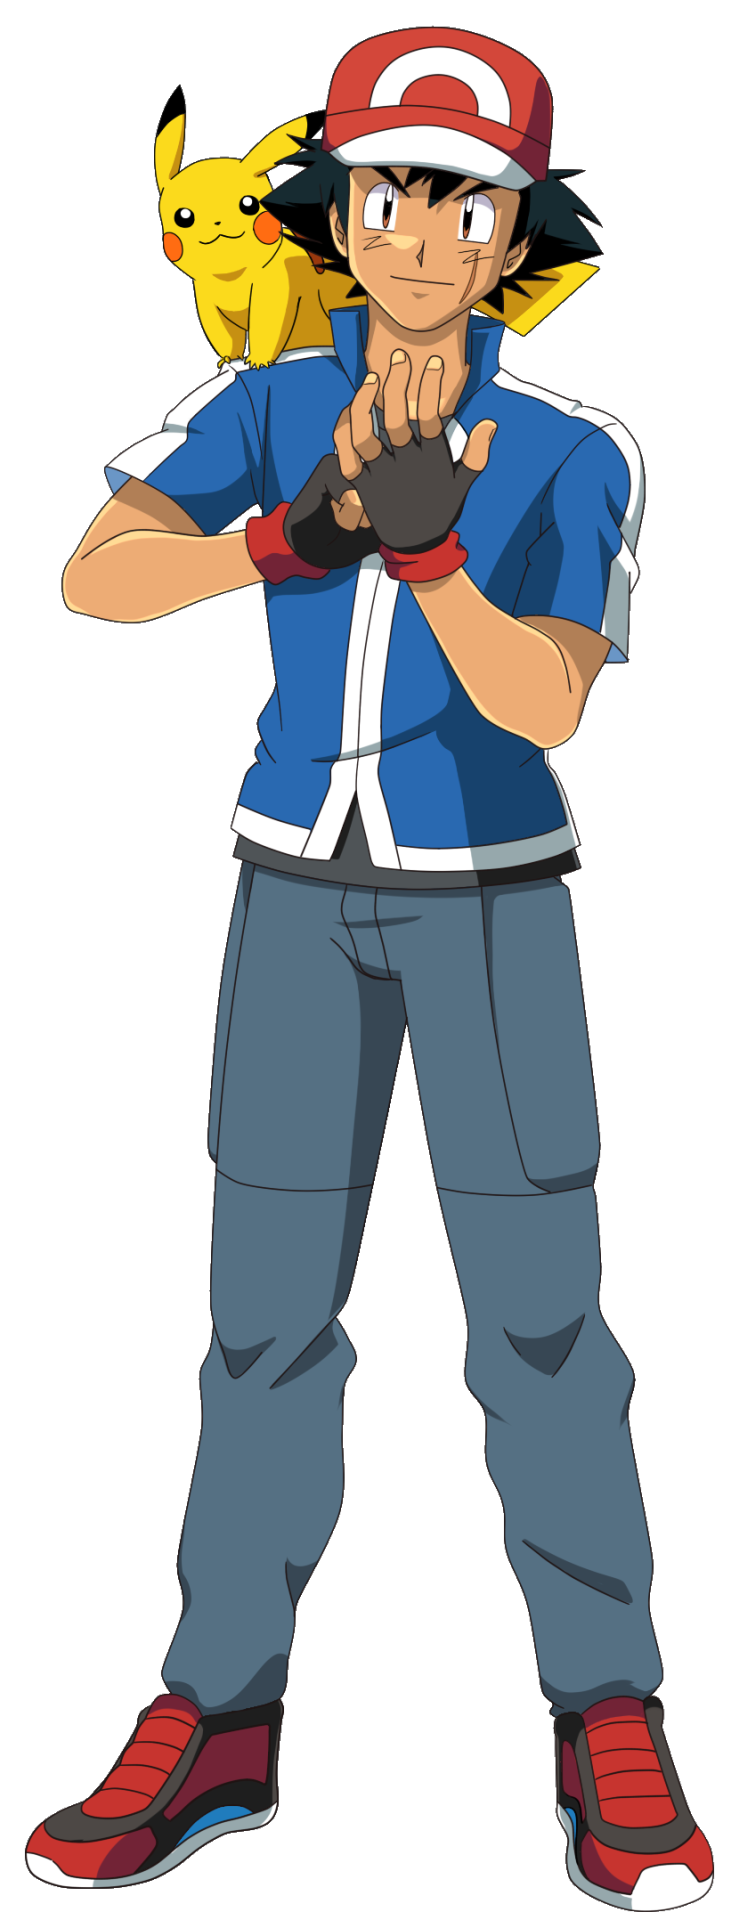 mezasepkmnmaster: Commission by Hollylu. Ash Ketchum with his Unova and Kalos outfits,